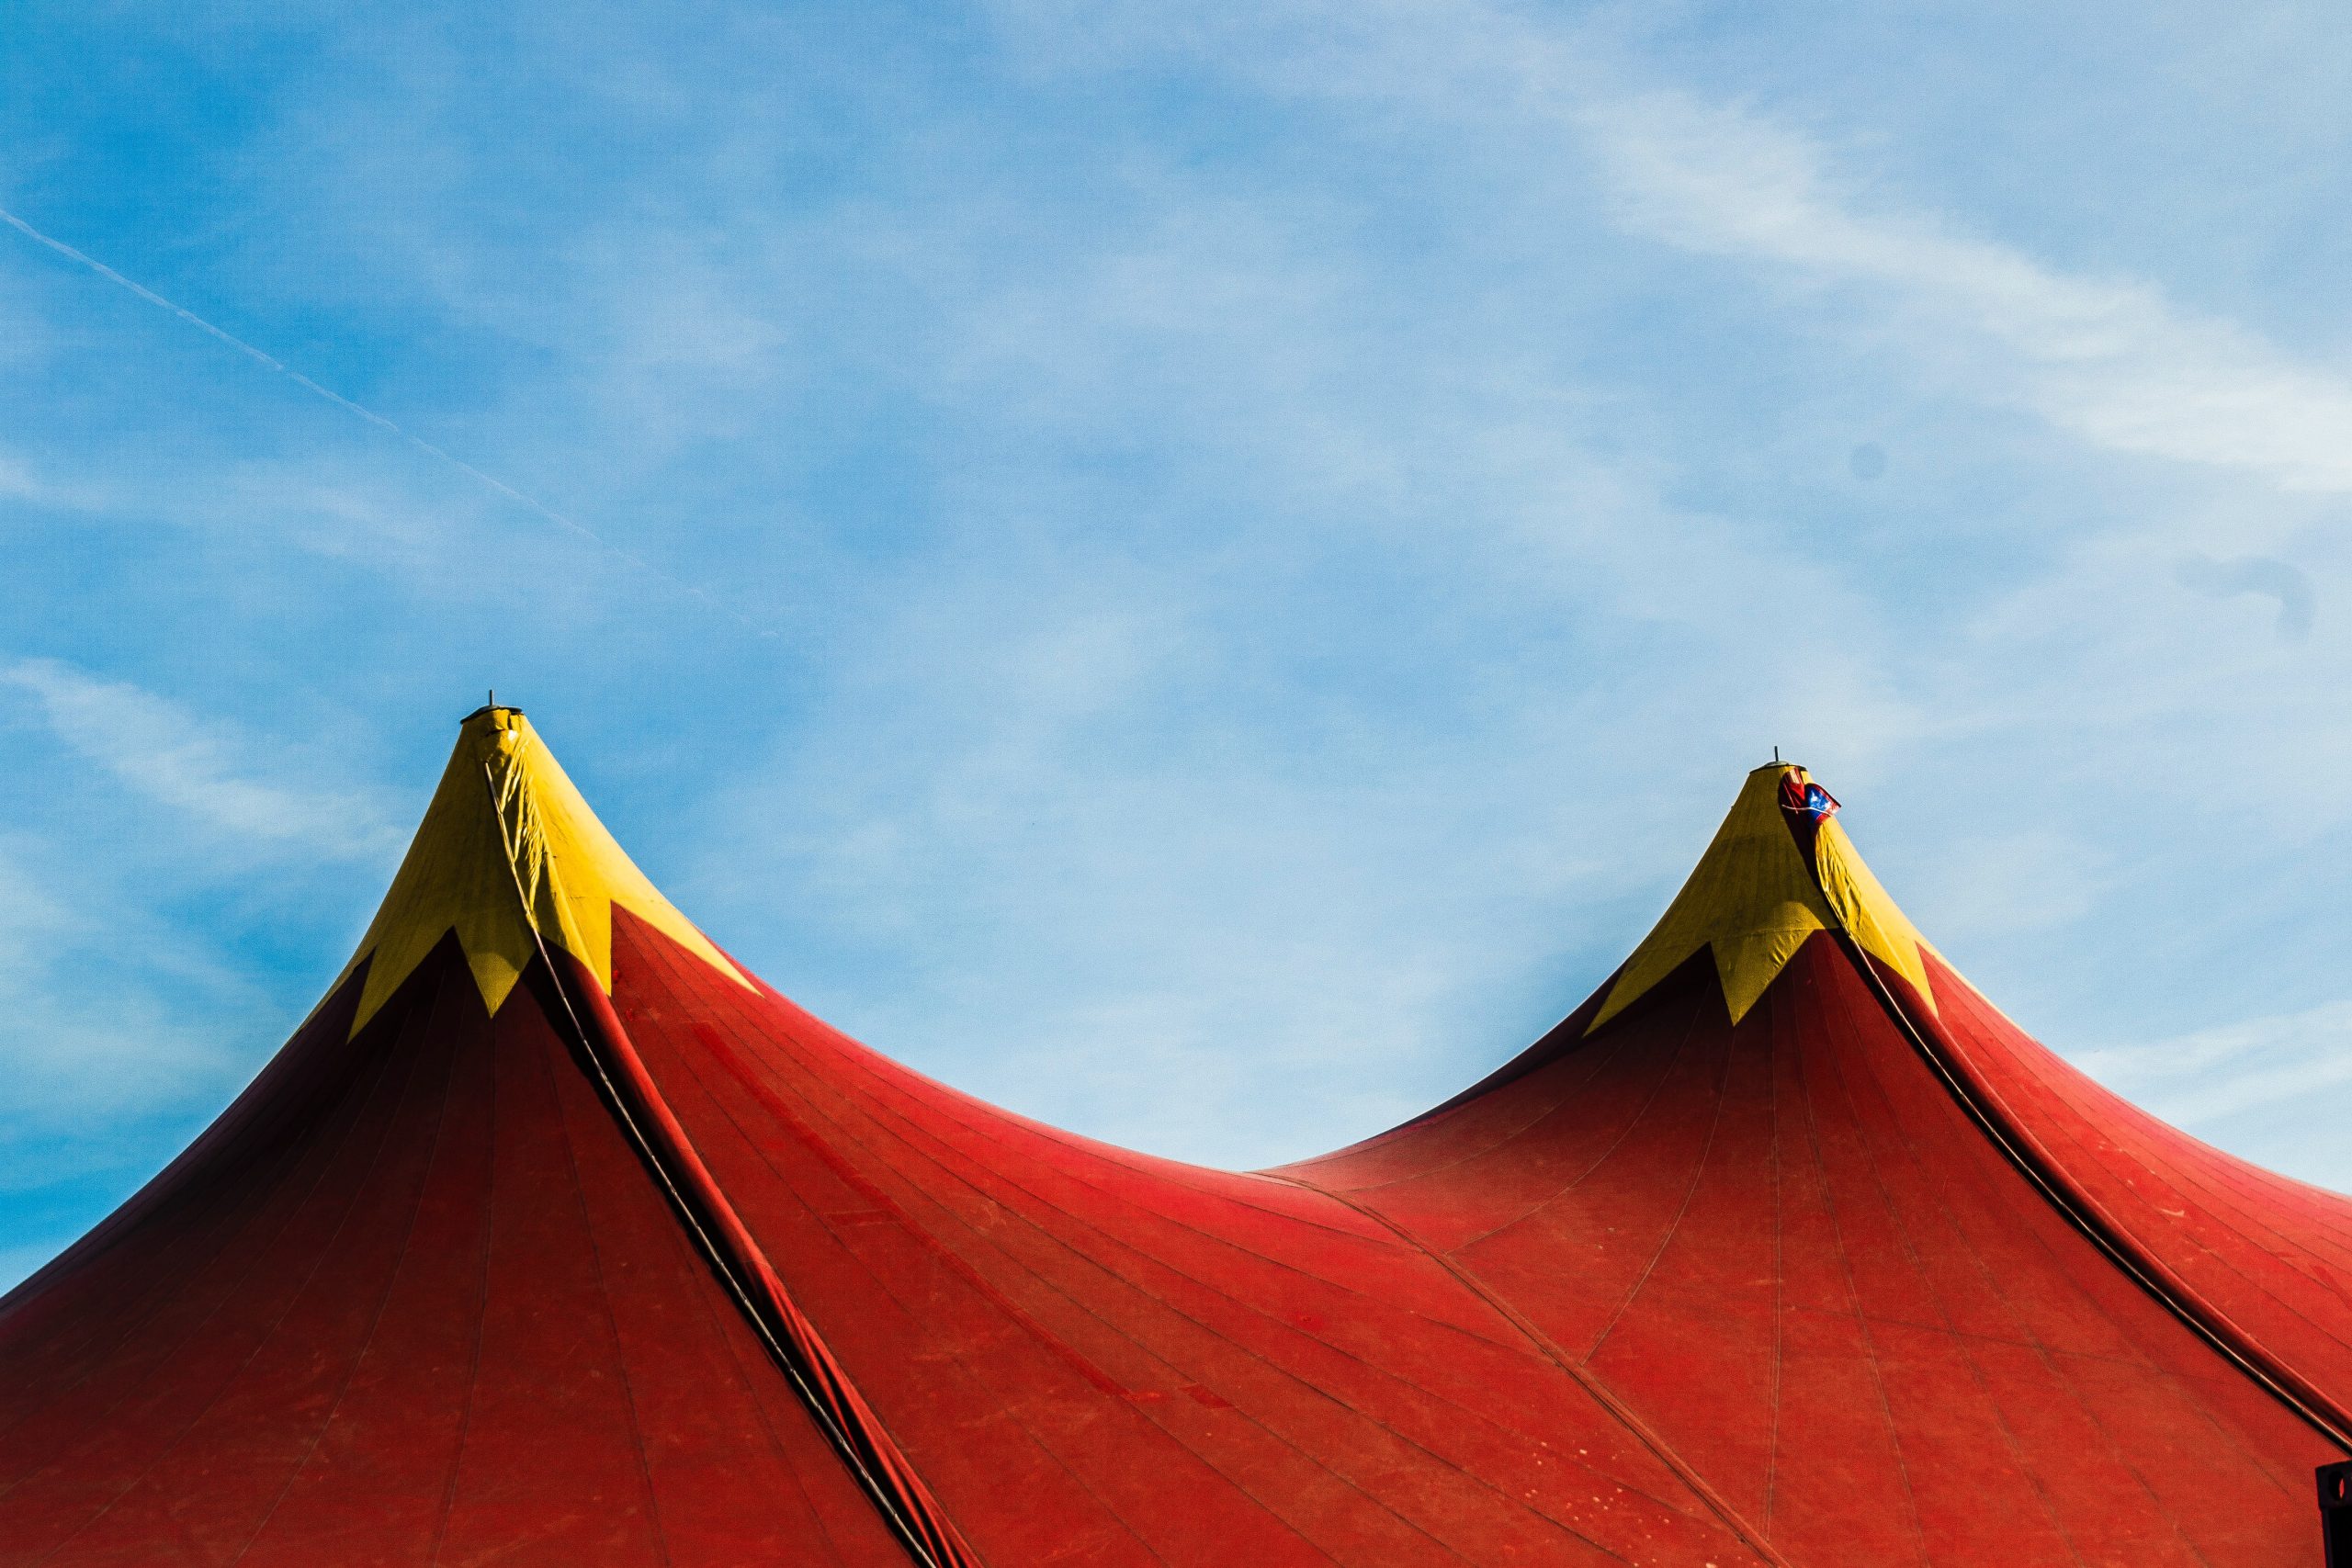 A photograph featuring two peaks at the top of a circus tent. The peaks are a bright scarlet colour and the tips are a mustard yellow. Above the tent, the sky is bright blue with a subtle dusting of white clouds.